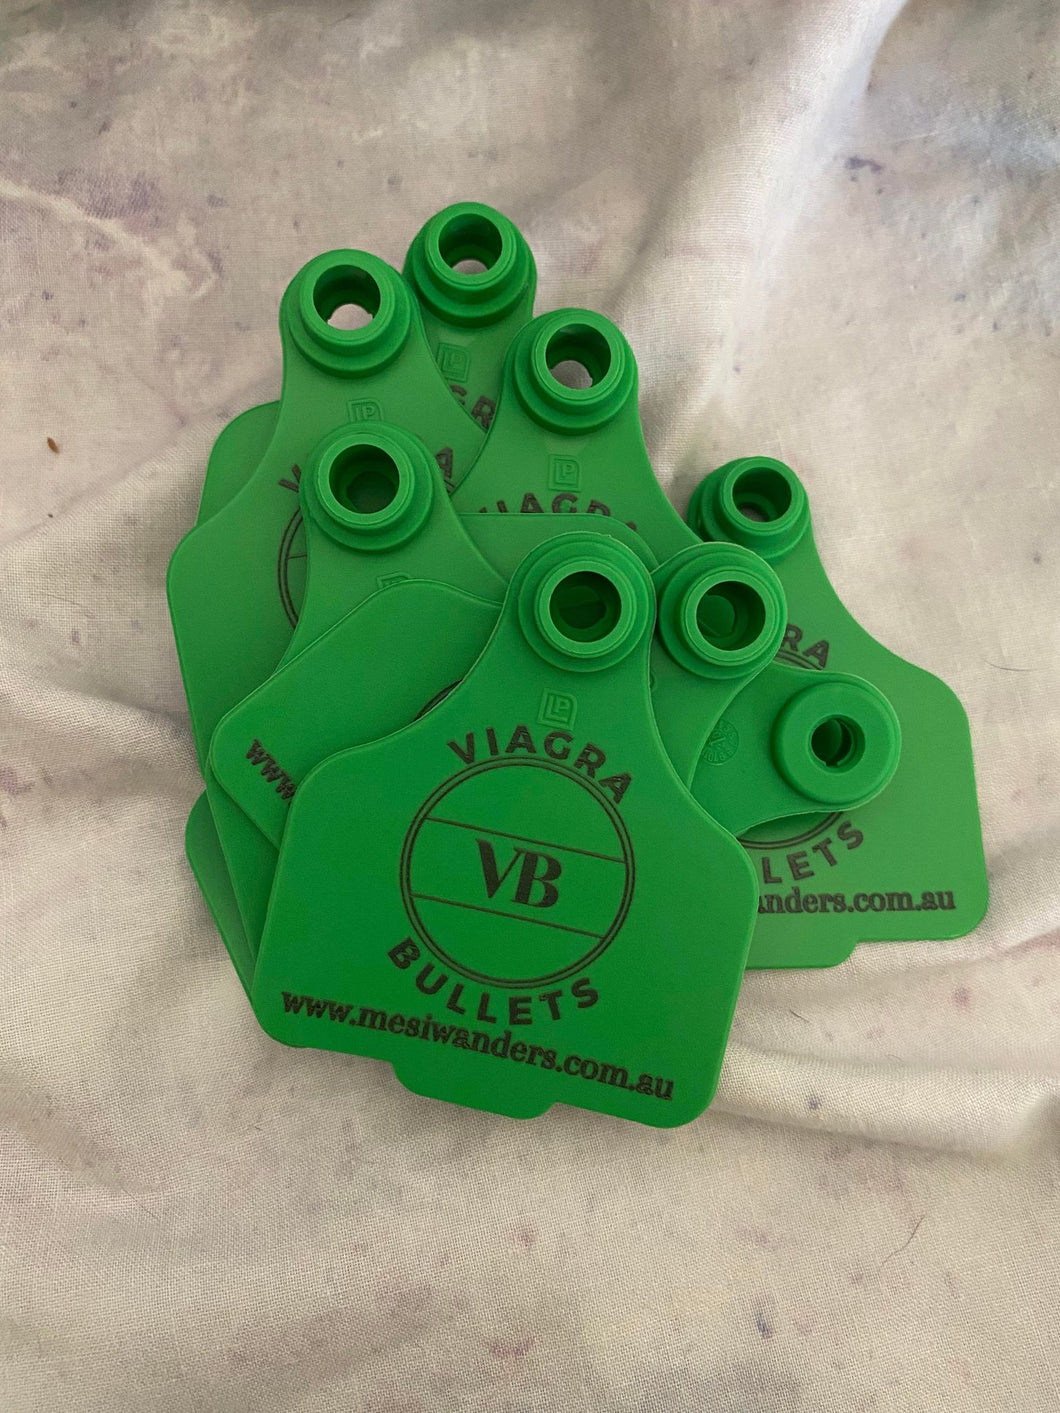 Viagra Bullets - Green Cattle Tags